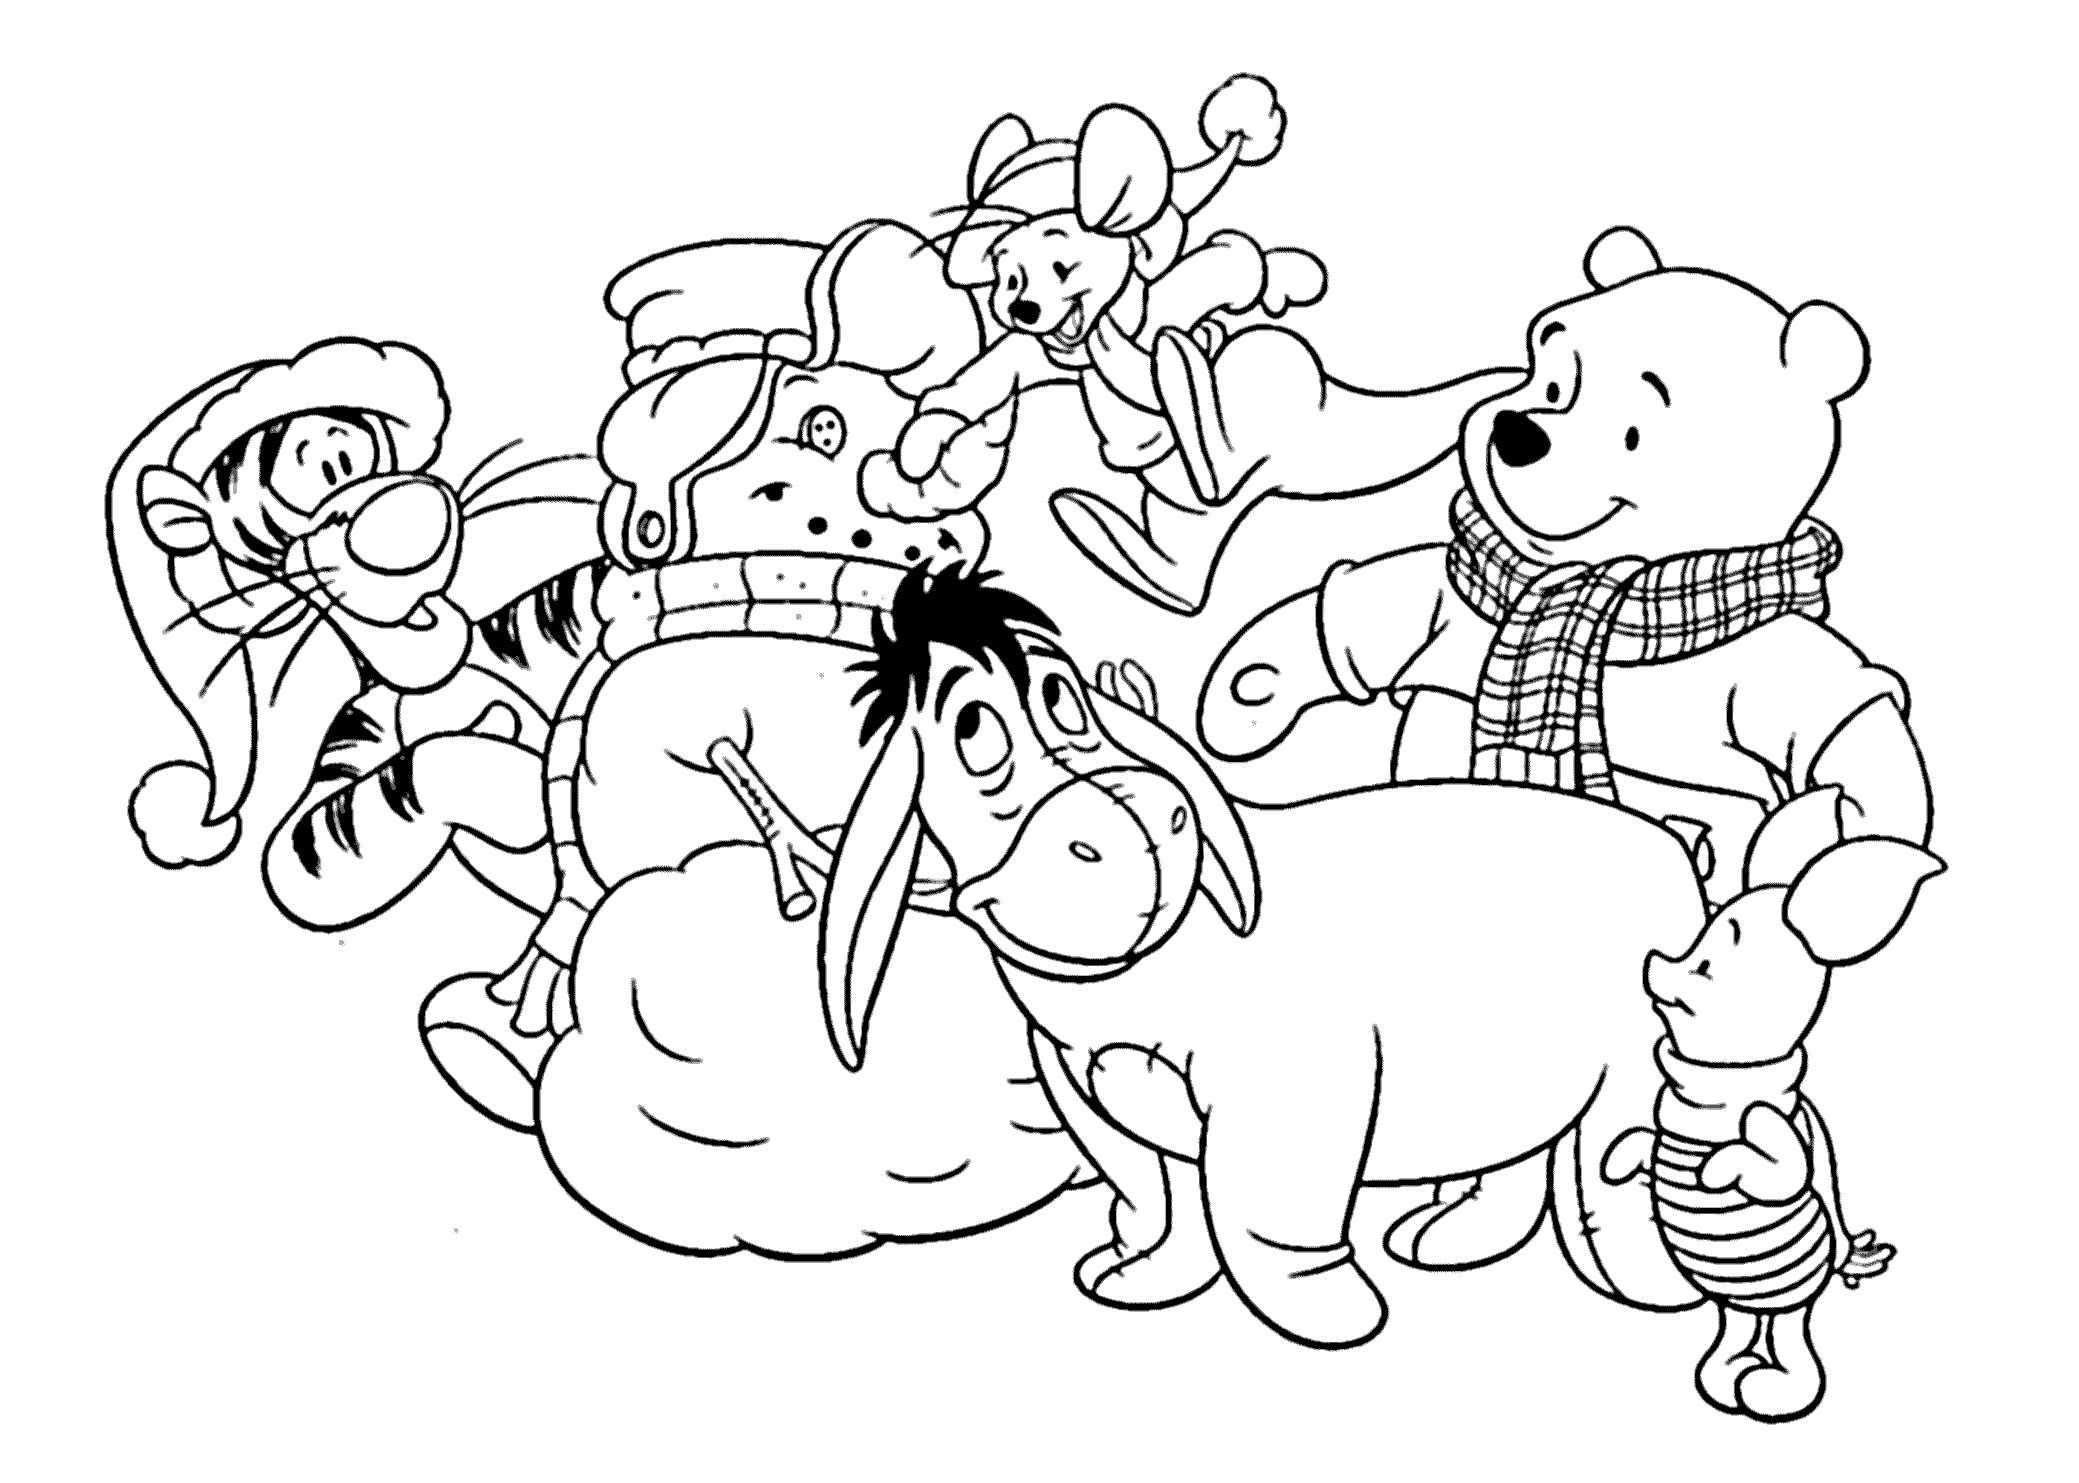 colouring pages christmas free holidays coloring pages download and print for free christmas colouring pages free 